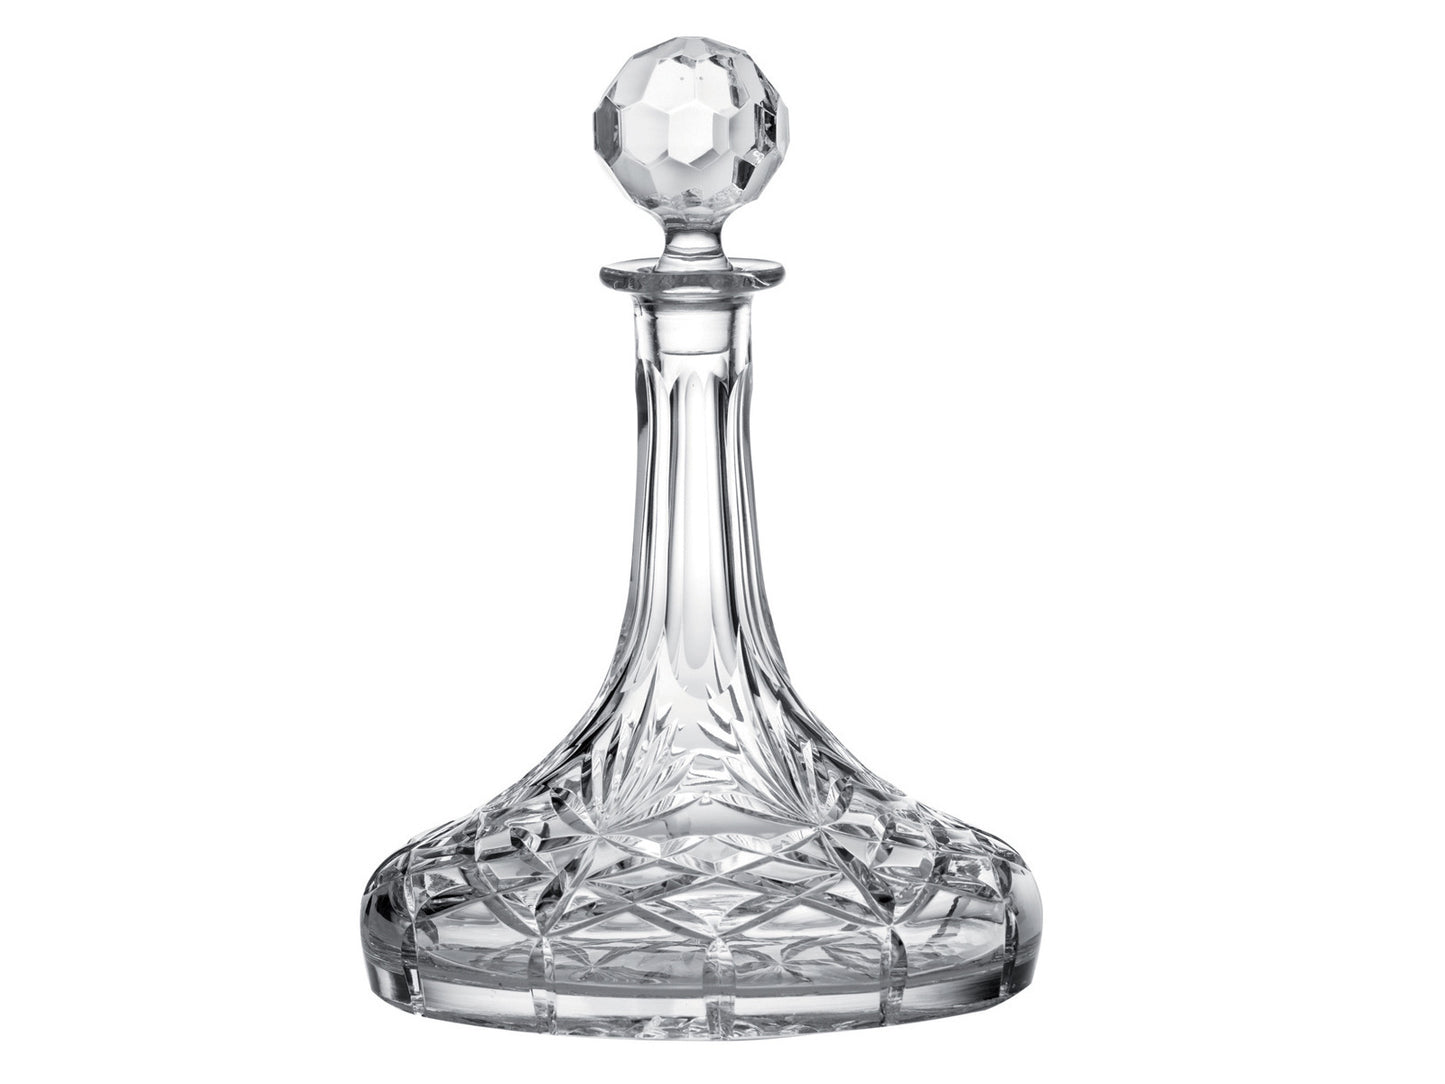 A crystal decanter with a wide base and long slender neck, with a golf-ball style stopper. It is cut with an intricate pattern that has diamonds around the outside of the base, moving into seven-pointed fans pointing towards the neck.